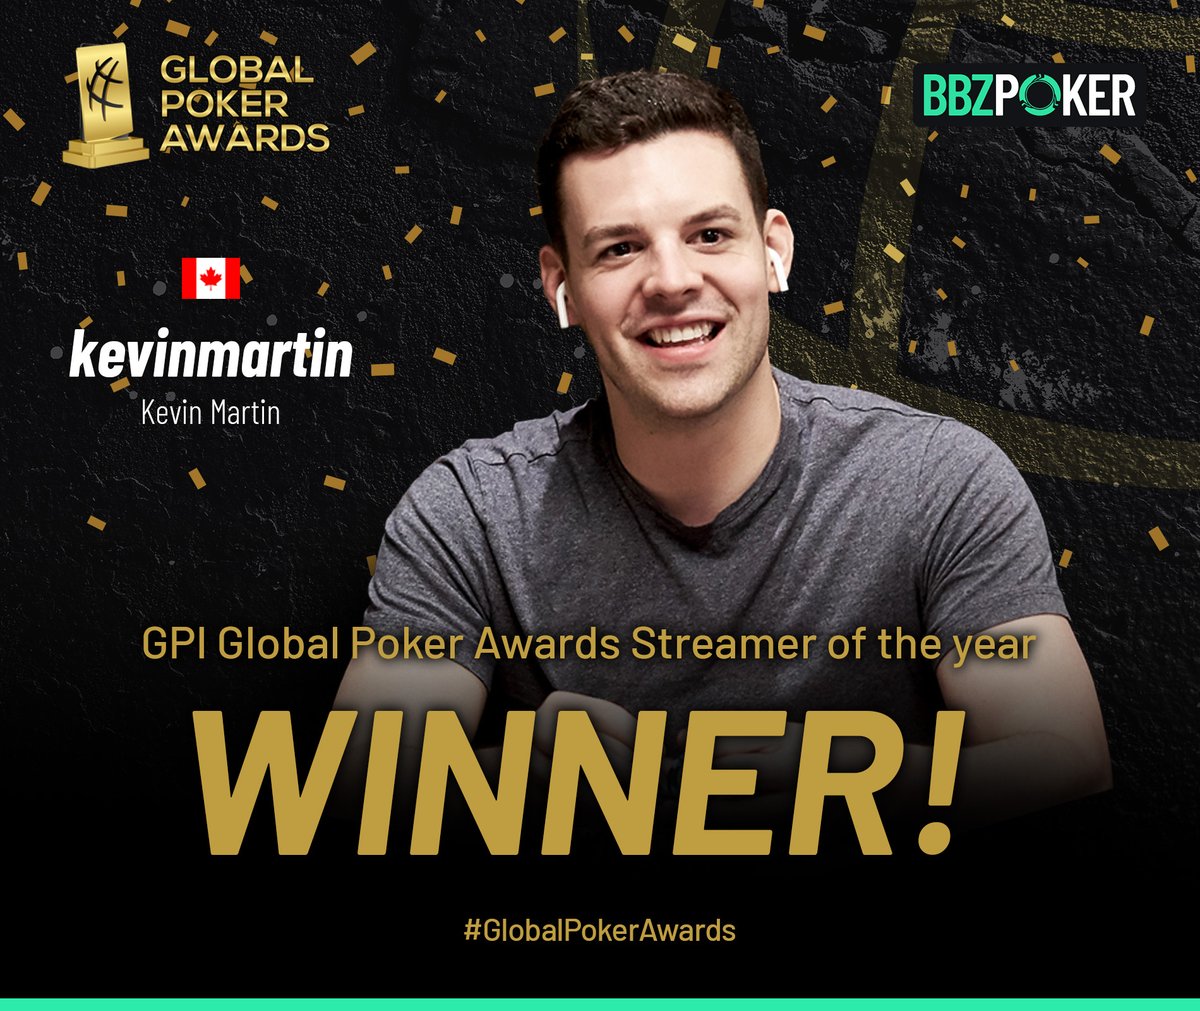 Grand Grav Fabrikant BBZ Poker on Twitter: "A HUGE BBZPOKER Congratulations to...  @KevinRobMartin ! 👏🏼 Streamer of the year at the Global Poker Awards!  Delighted to see you do it. Keep creating content that moves